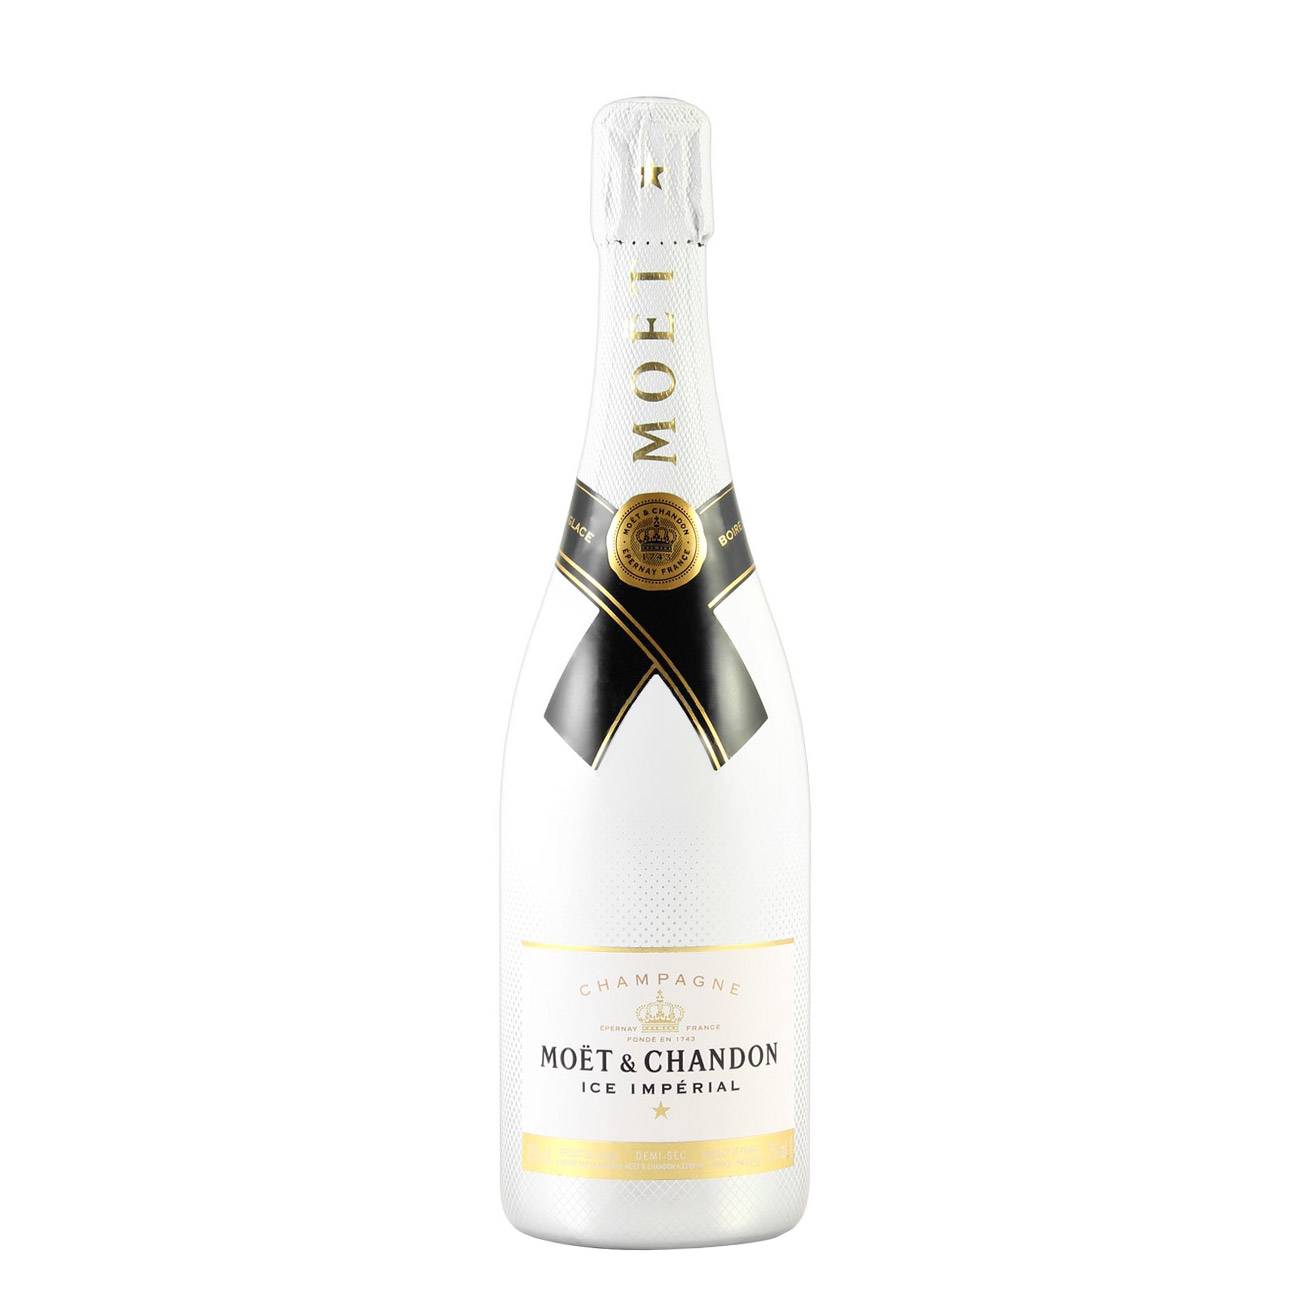 Moet & Chandon CHANDON ICE IMPERIAL 750 ml Pret Mic 750